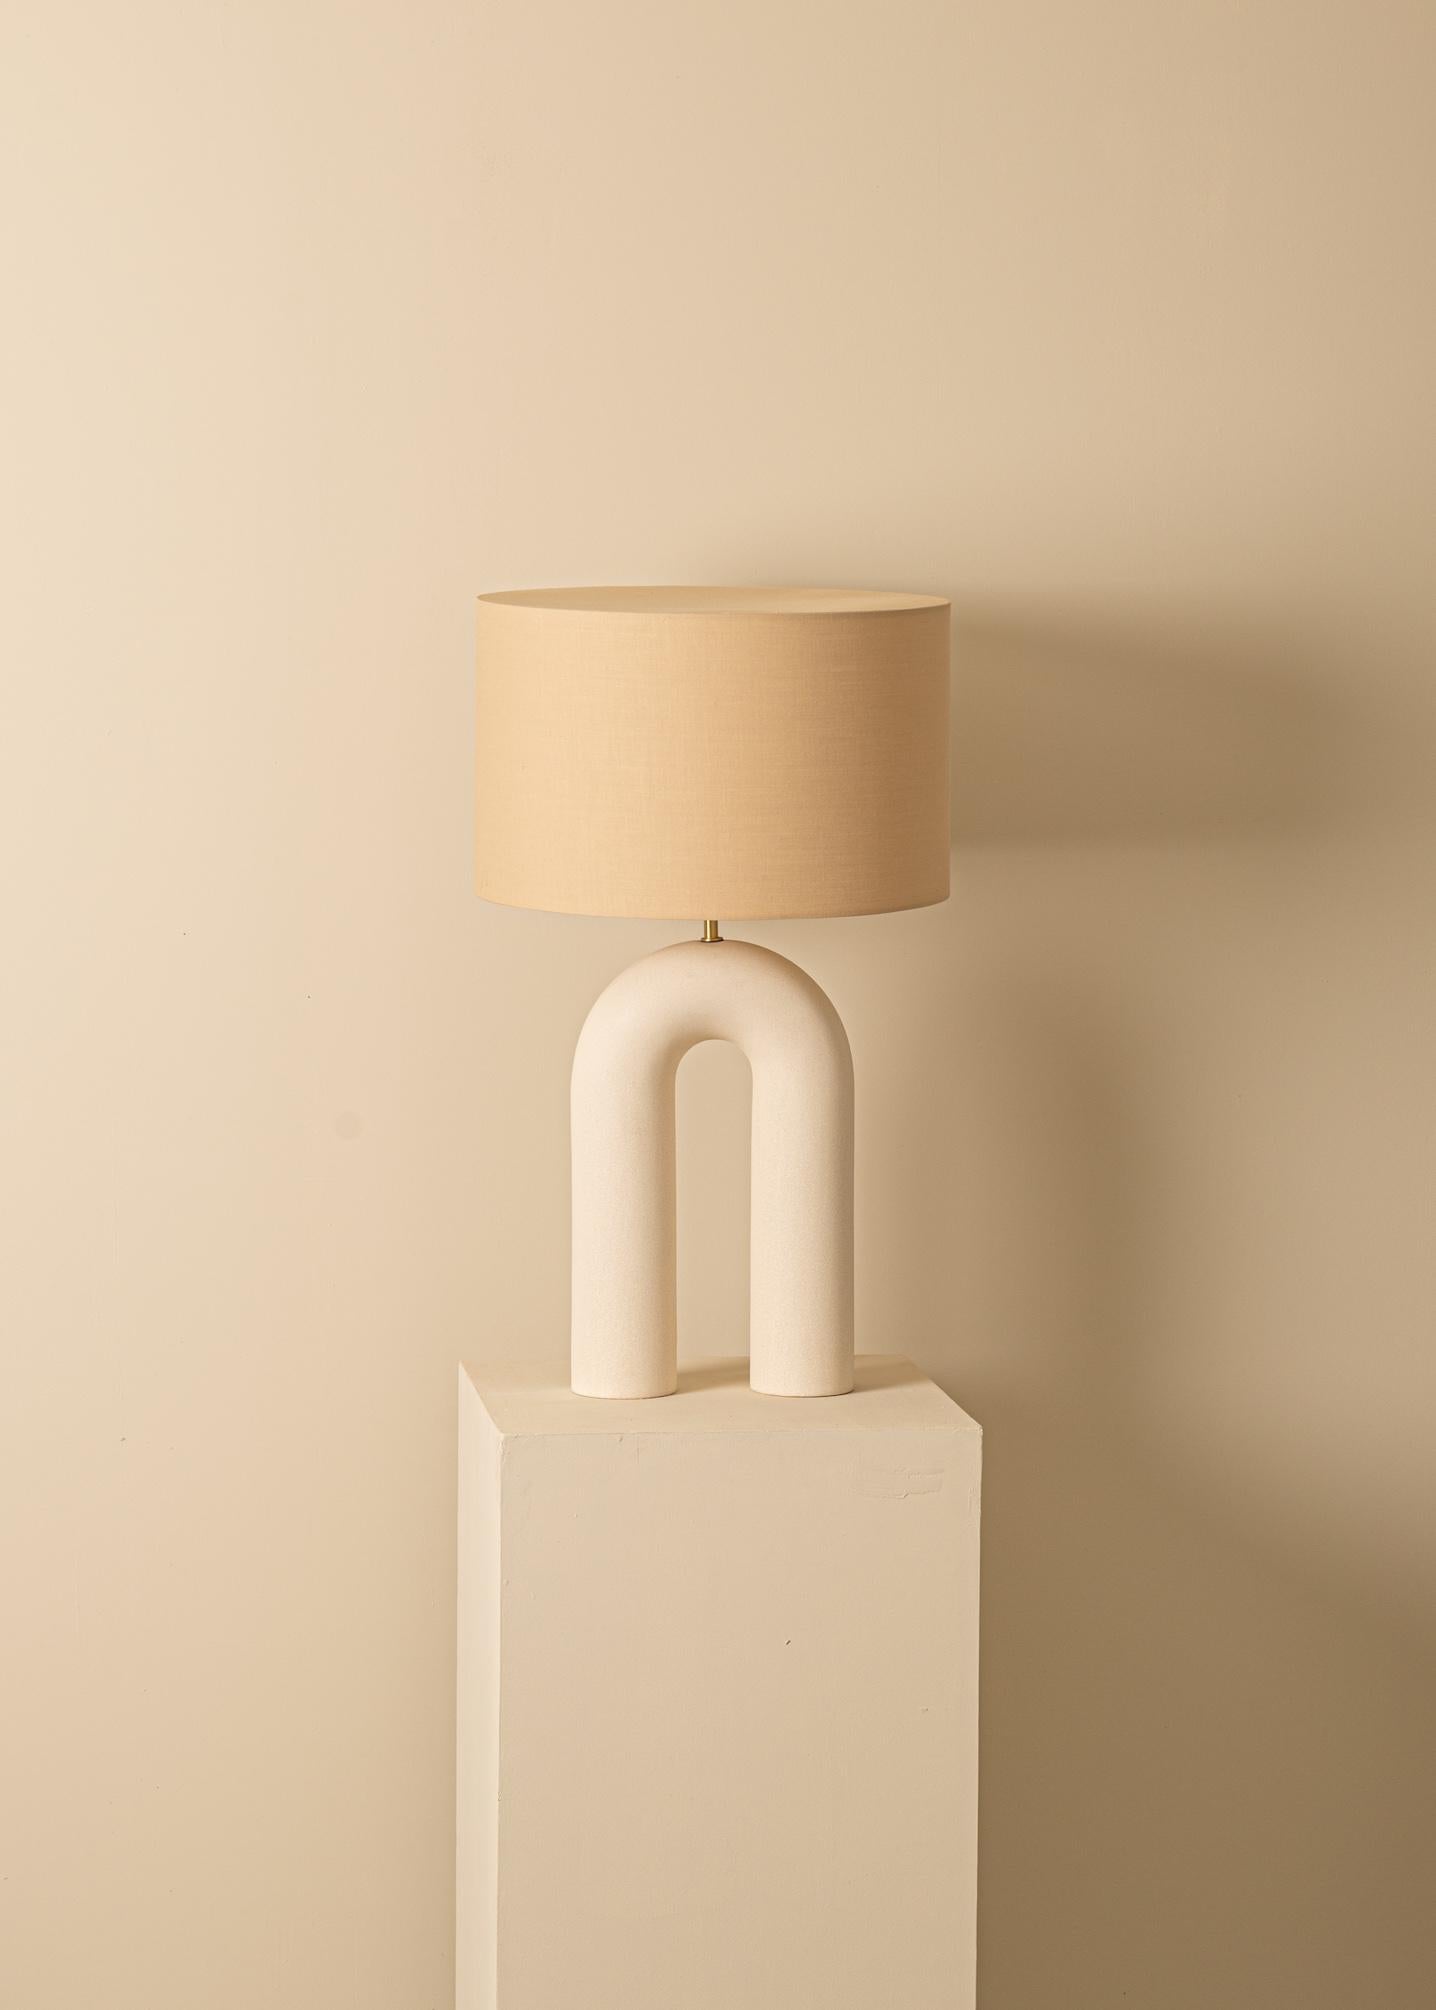 Ecru Ceramic Arko Table Lamp with Light Brown Lampshade by Simone & Marcel
Dimensions: Ø 40 x H 67 cm.
Materials: Cotton lampshade and ceramic.

Also available in different marbles and ceramics. Custom options available on request. Please contact